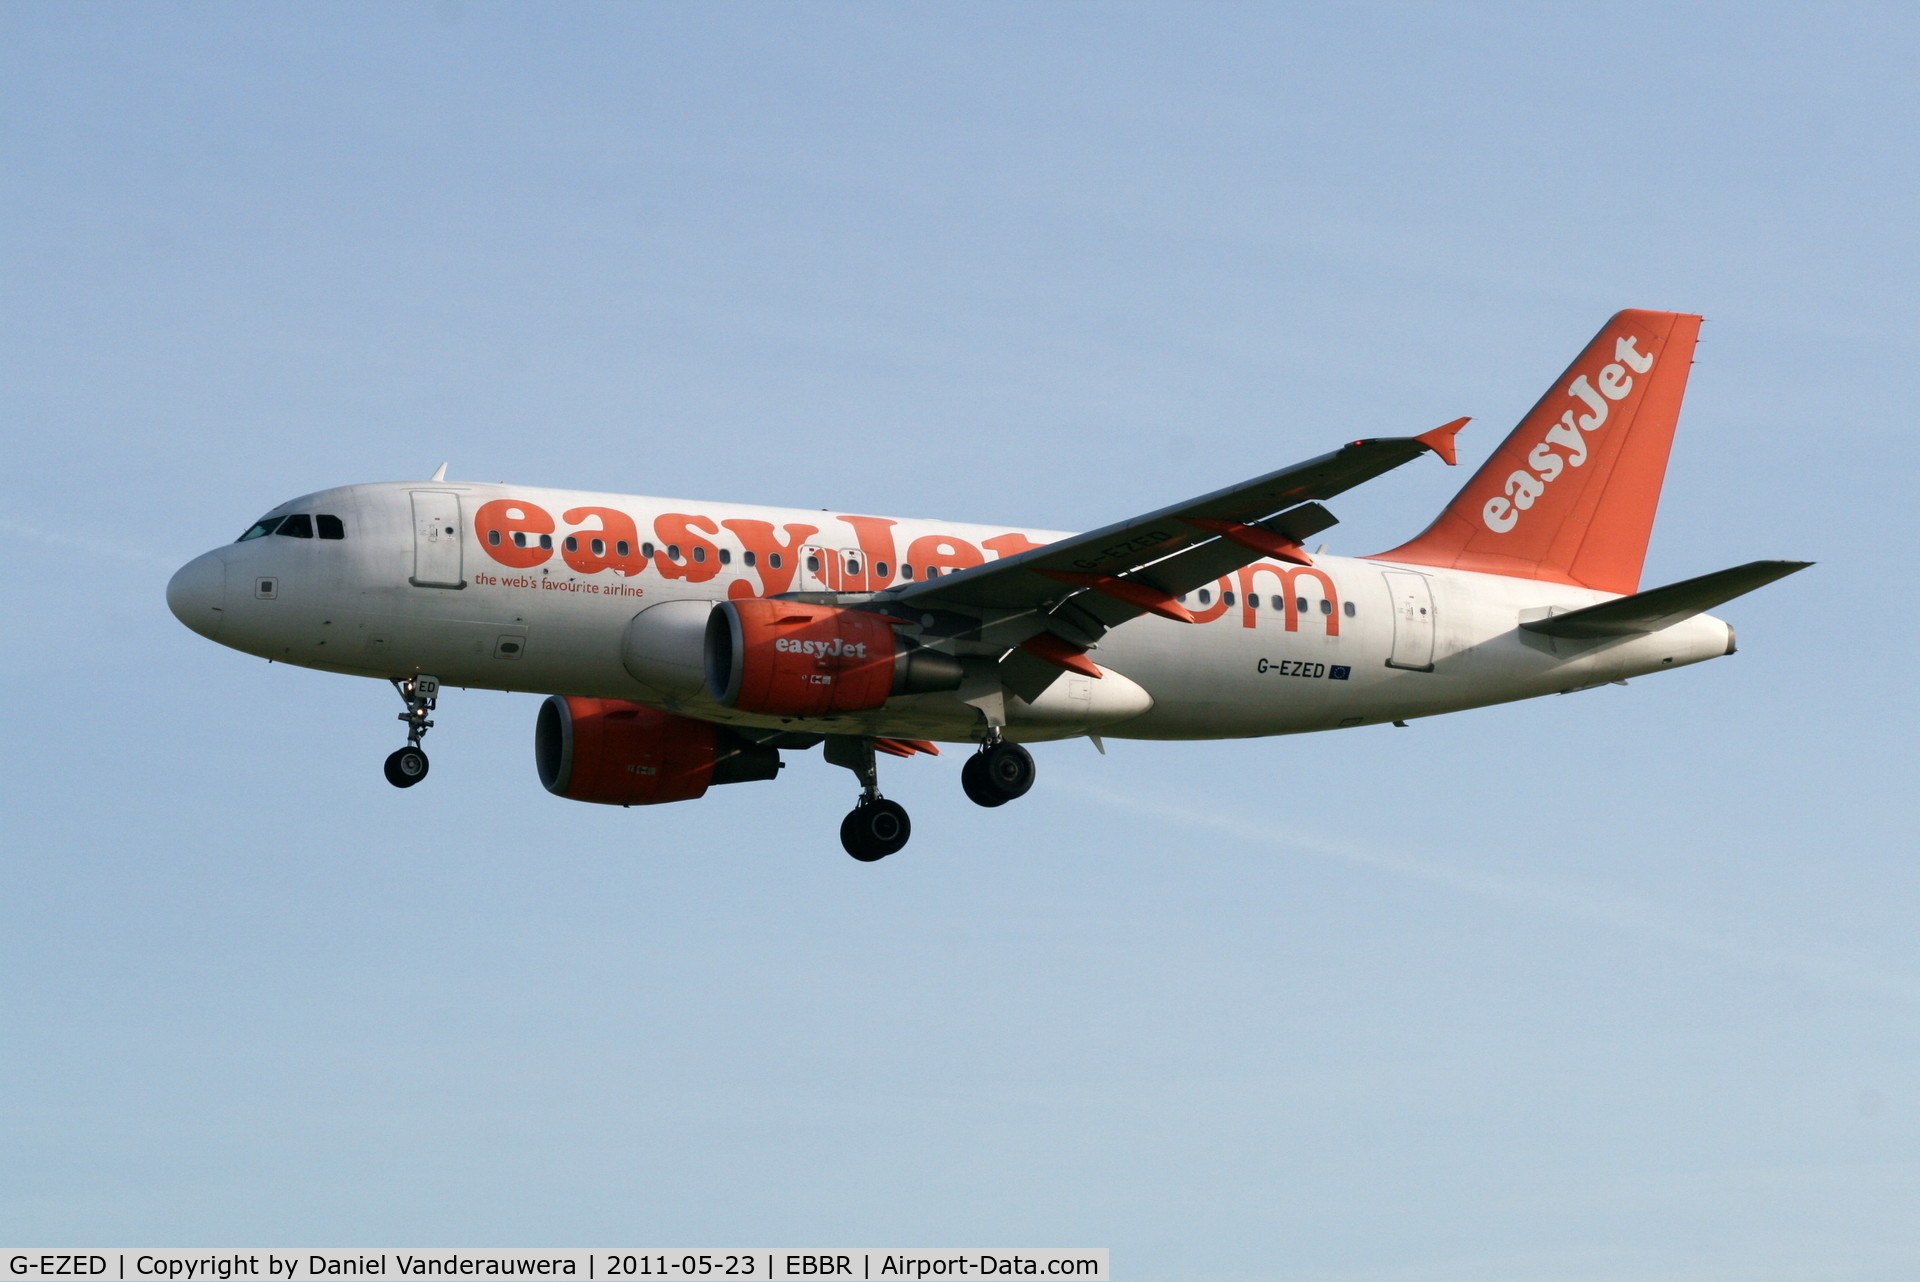 G-EZED, 2004 Airbus A319-111 C/N 2170, Arrival of flight EZY2795 to RWY 25L